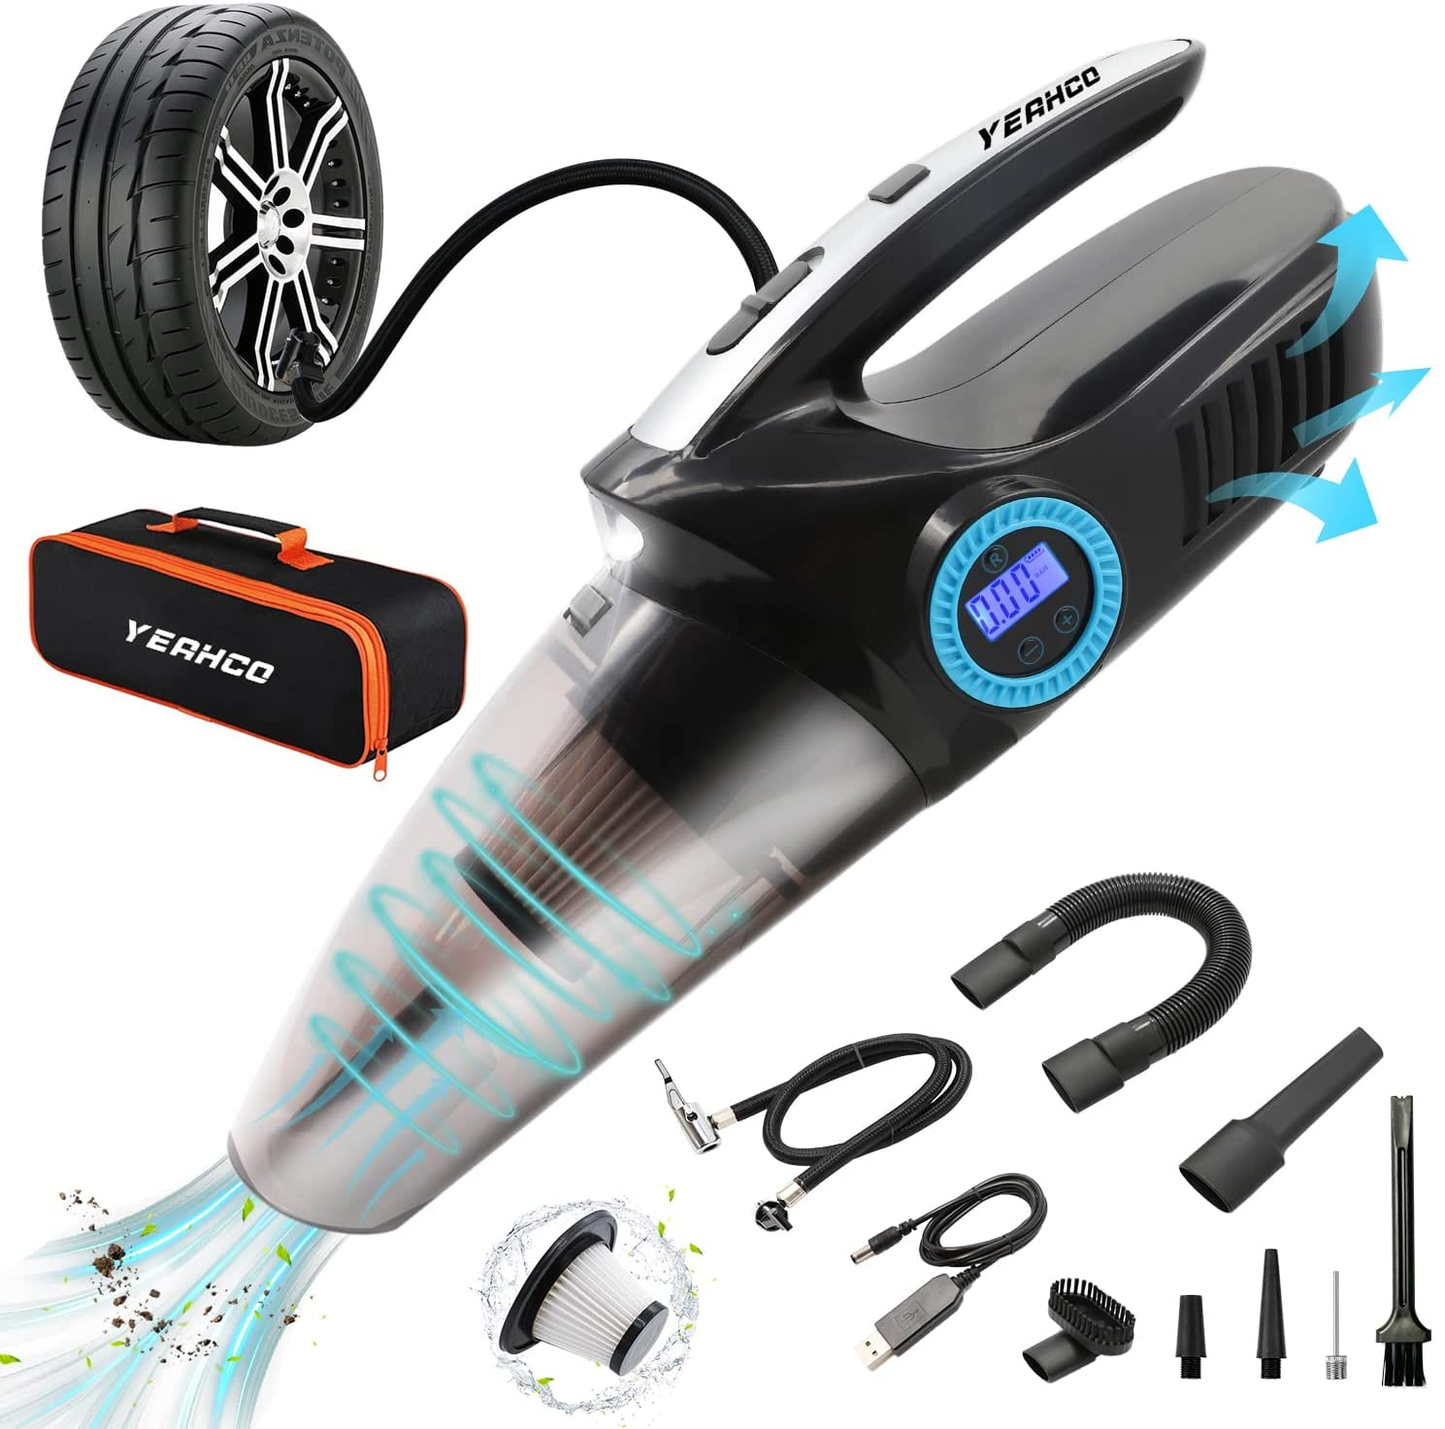 4-In-1 Car Vacuum Cleaner, Cordless Rechargeable 8000Pa High Power Portable Vacuum Cleaner Inflate for Car,Handheld Vacuum Cleaner with Digital Tire Pressure Gauge LCD Display for Home Car